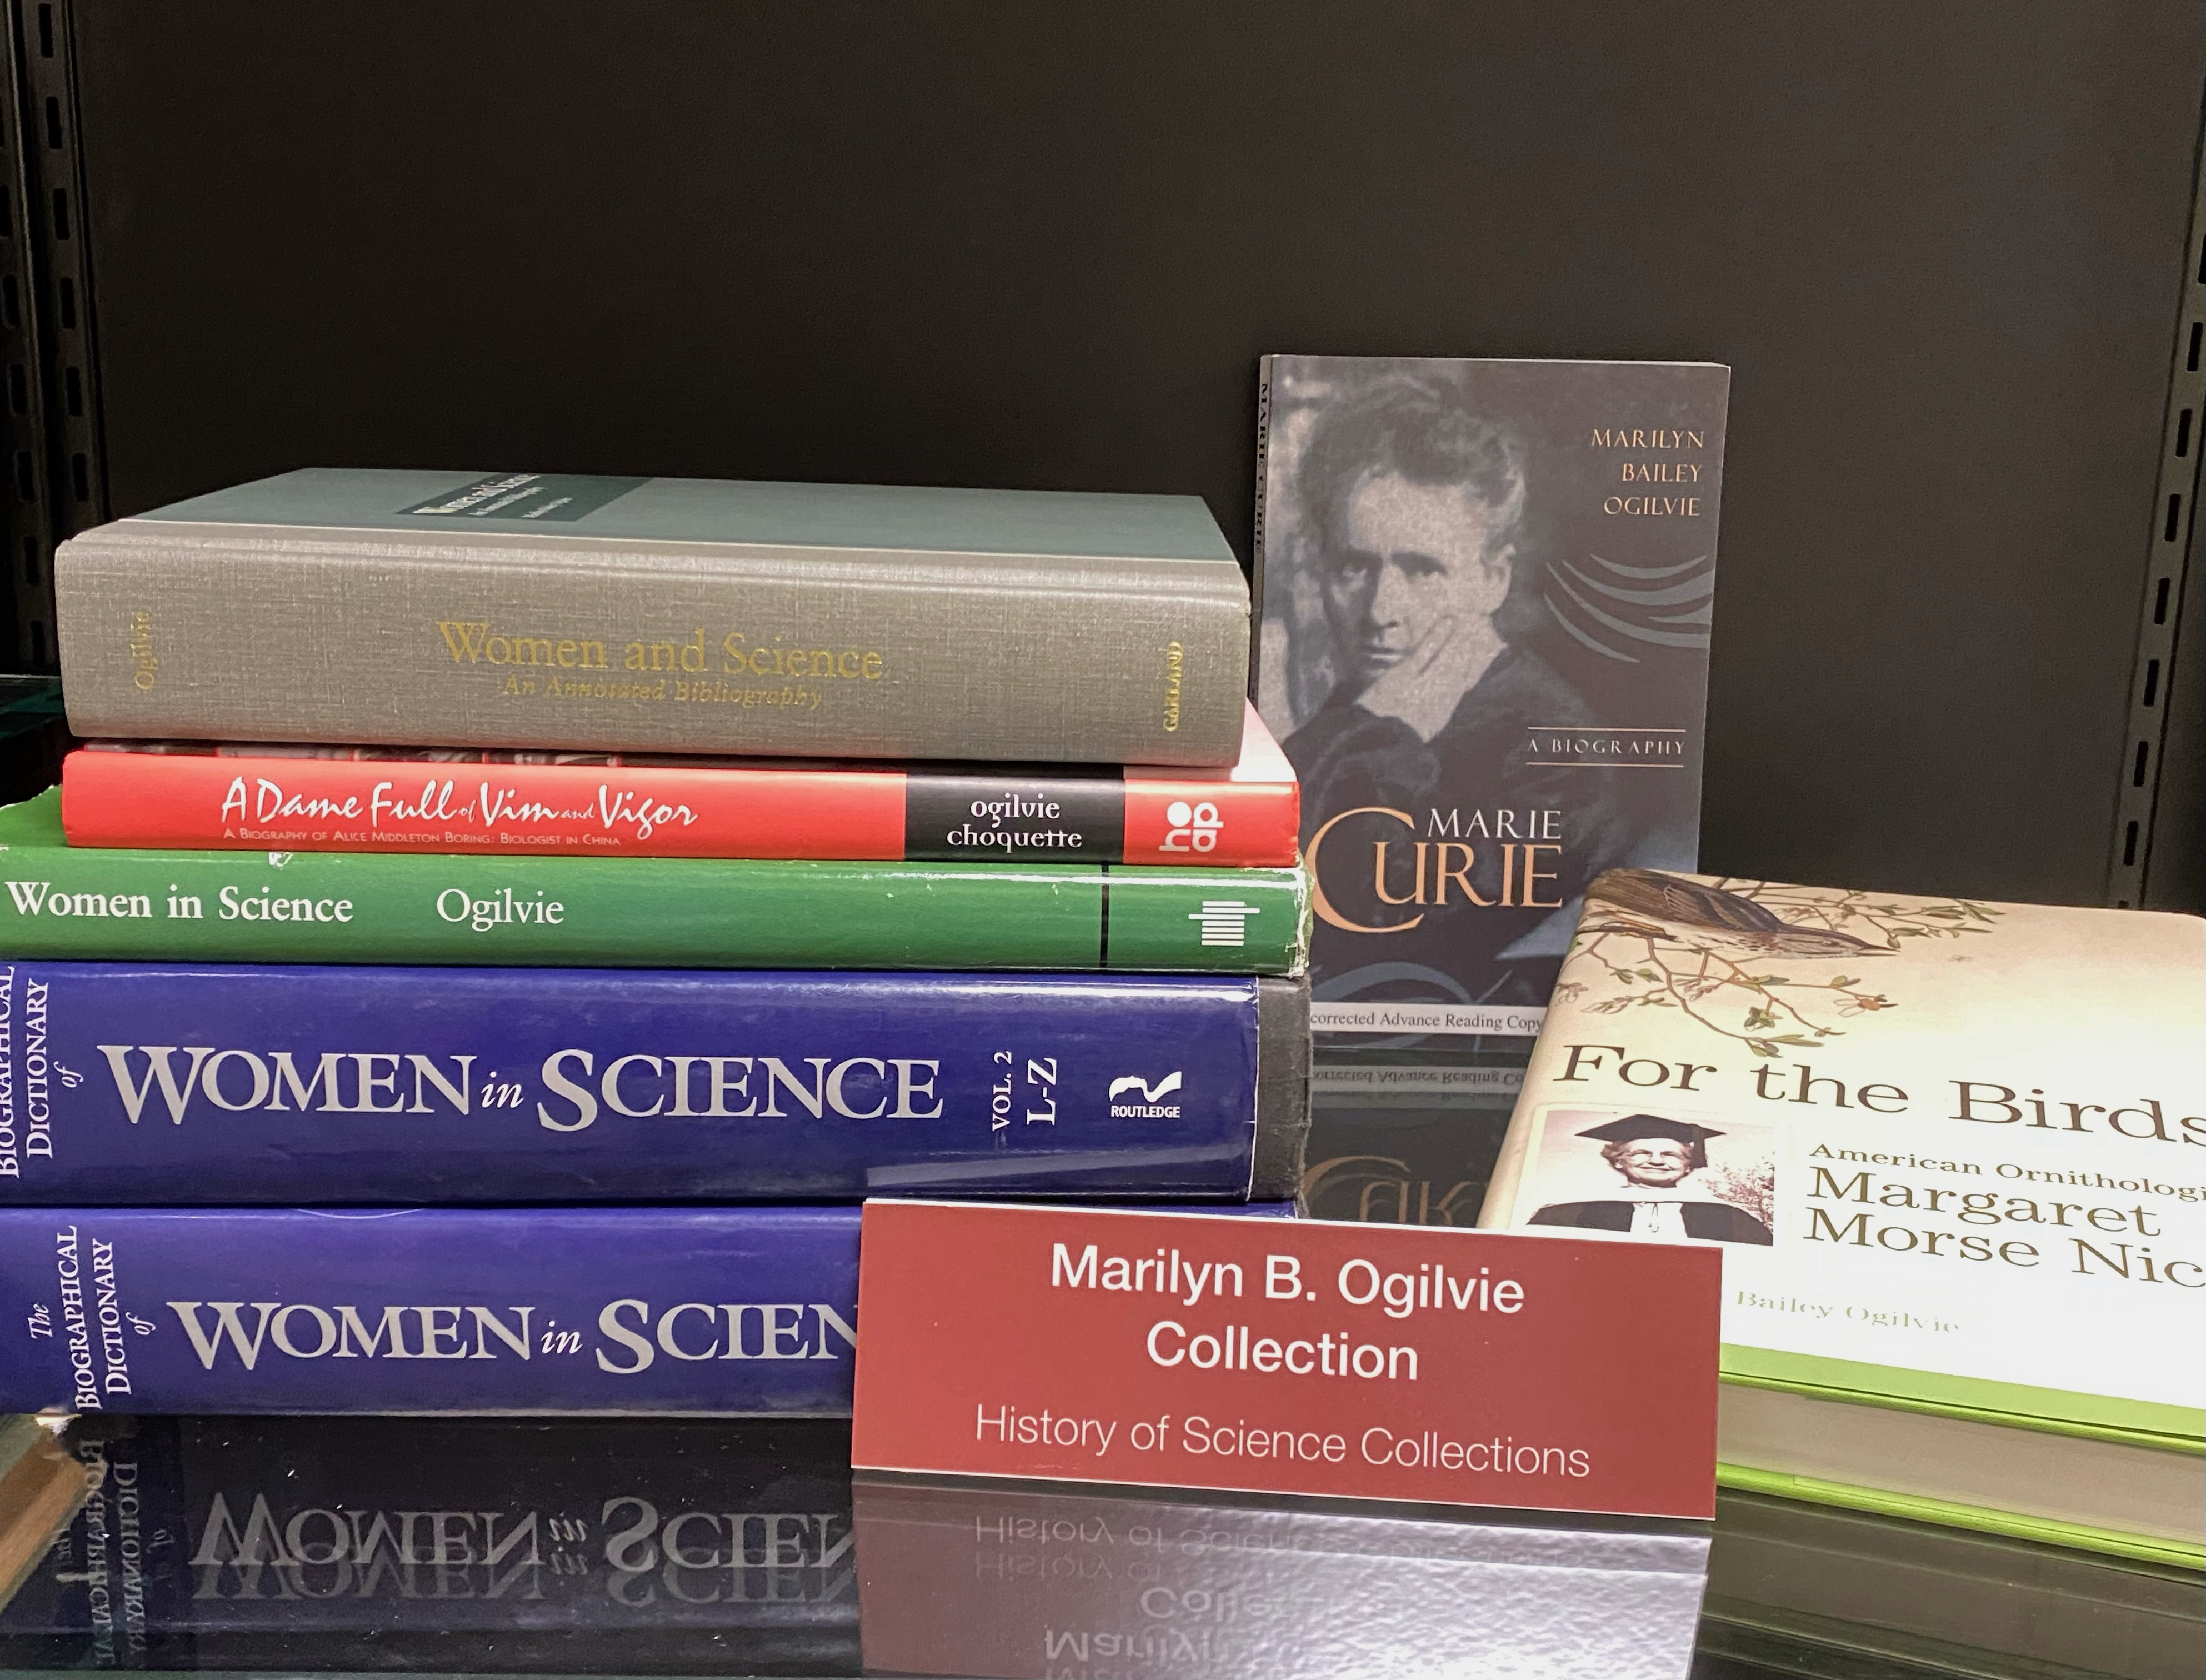 Photo of shelf of books on women and science, with sign "Marilyn B. Ogilvie Collection."